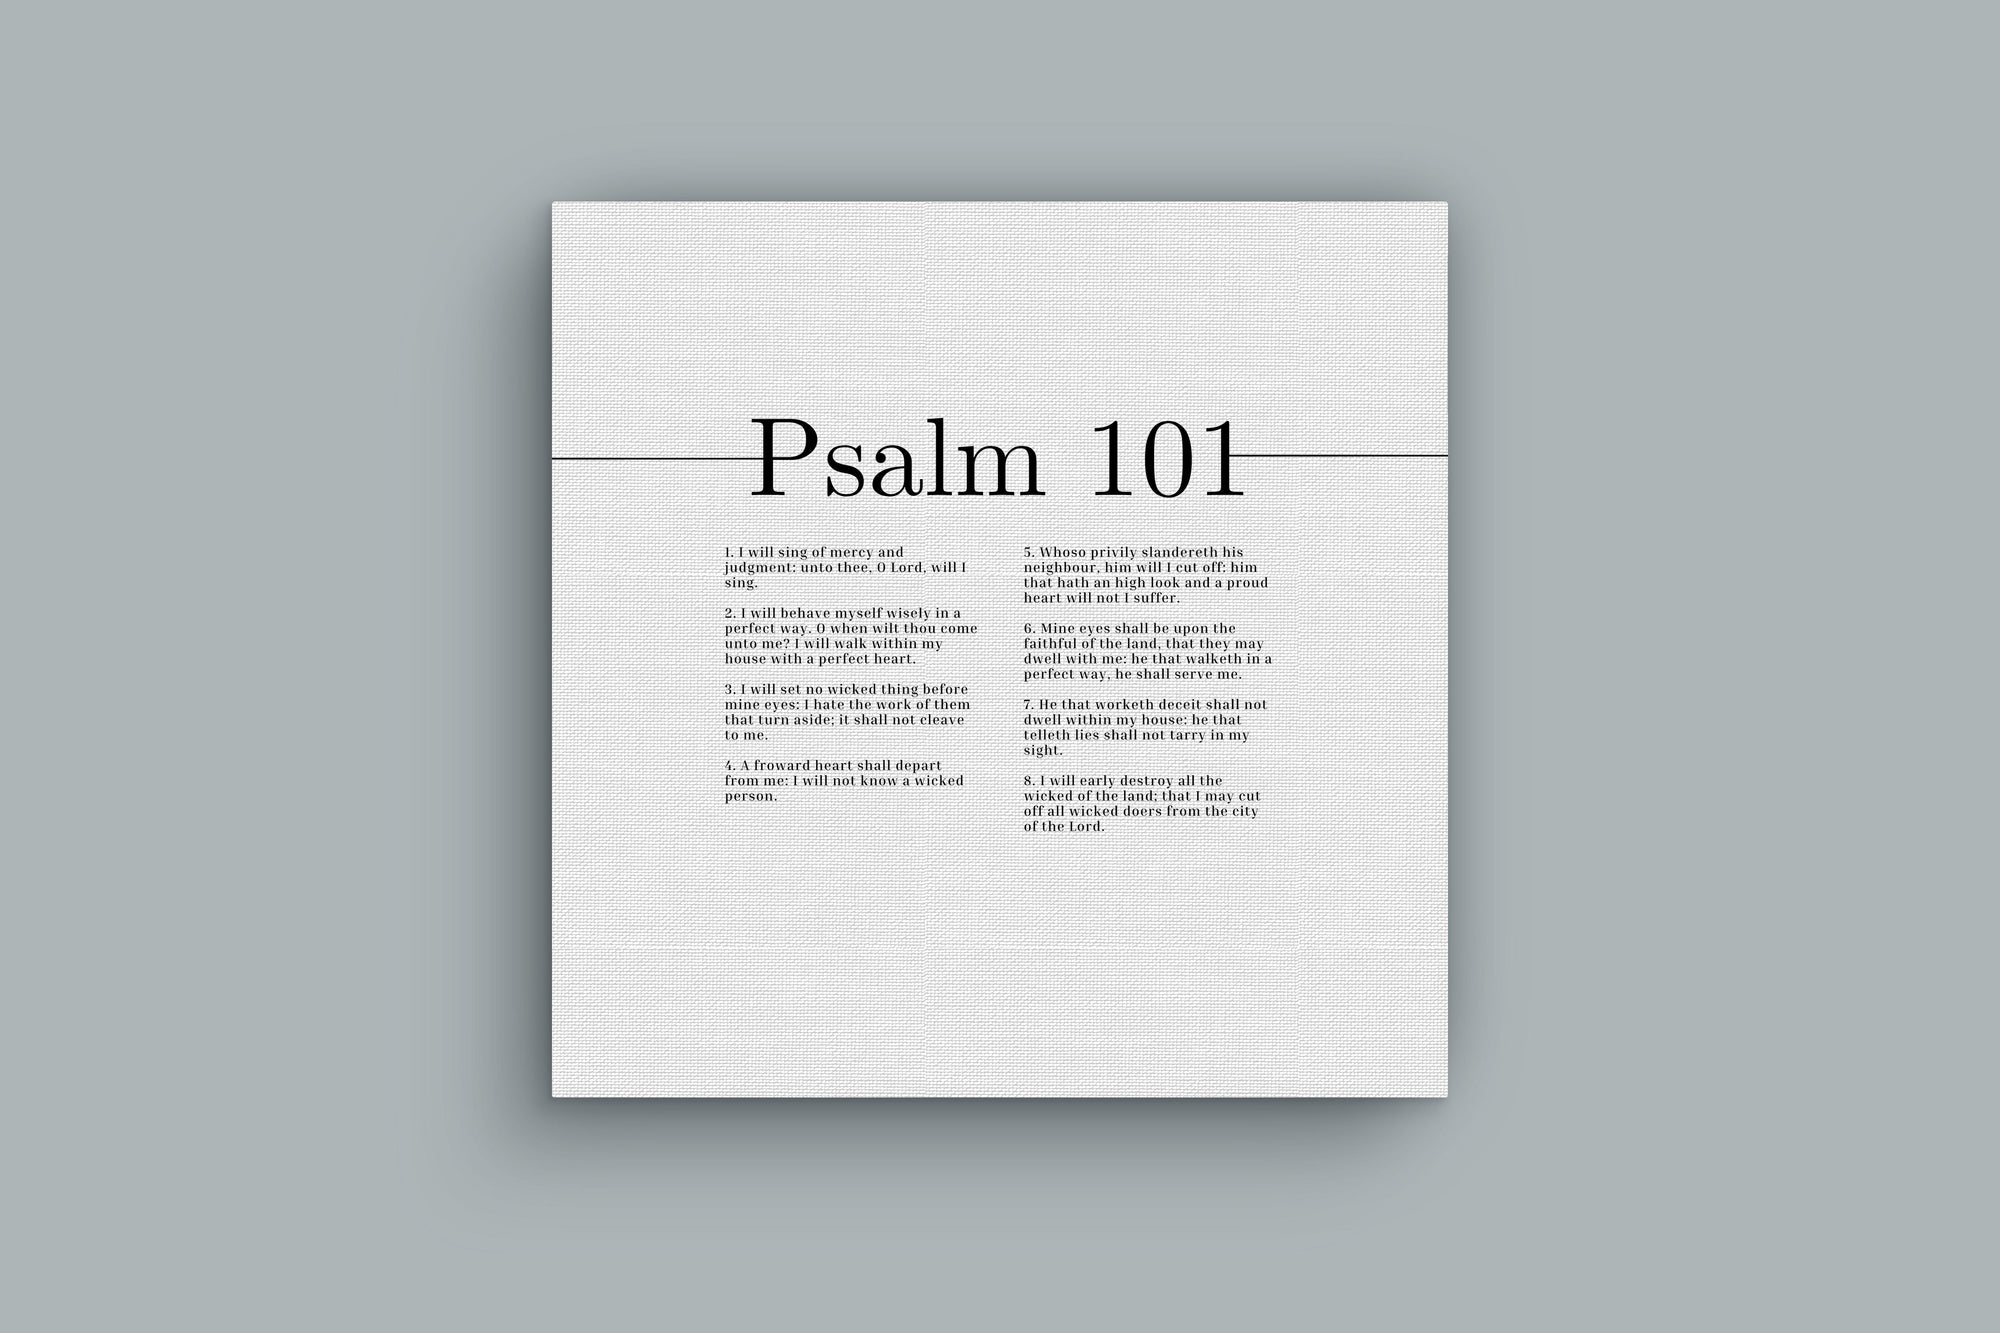 Scripture Walls Sing Of Mercy And Judgement Psalm 101 Bible Verse Canvas Christian Wall Art Ready to Hang Unframed-Express Your Love Gifts